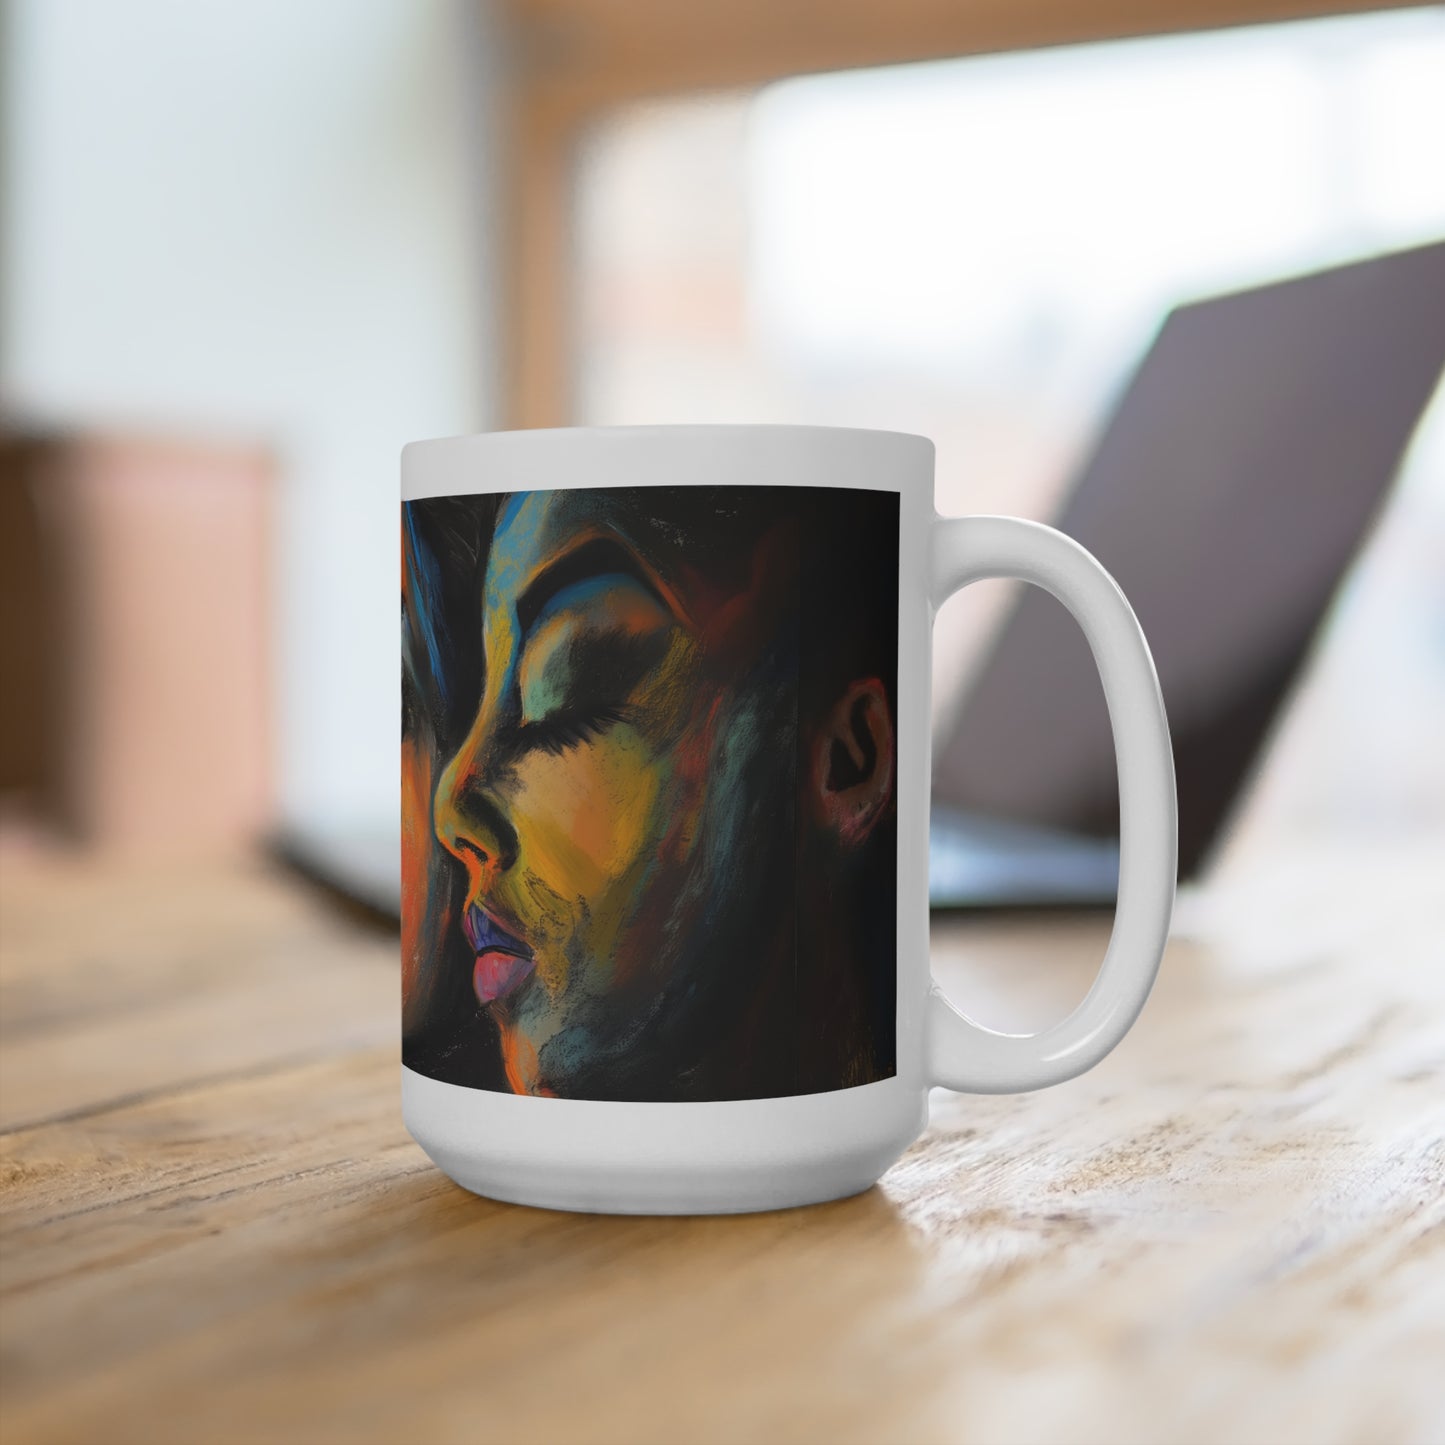 Love is Love! Bold and Inspirational Statement Coffee Mug (15oz): Evocative Expressionist Style Political Activism